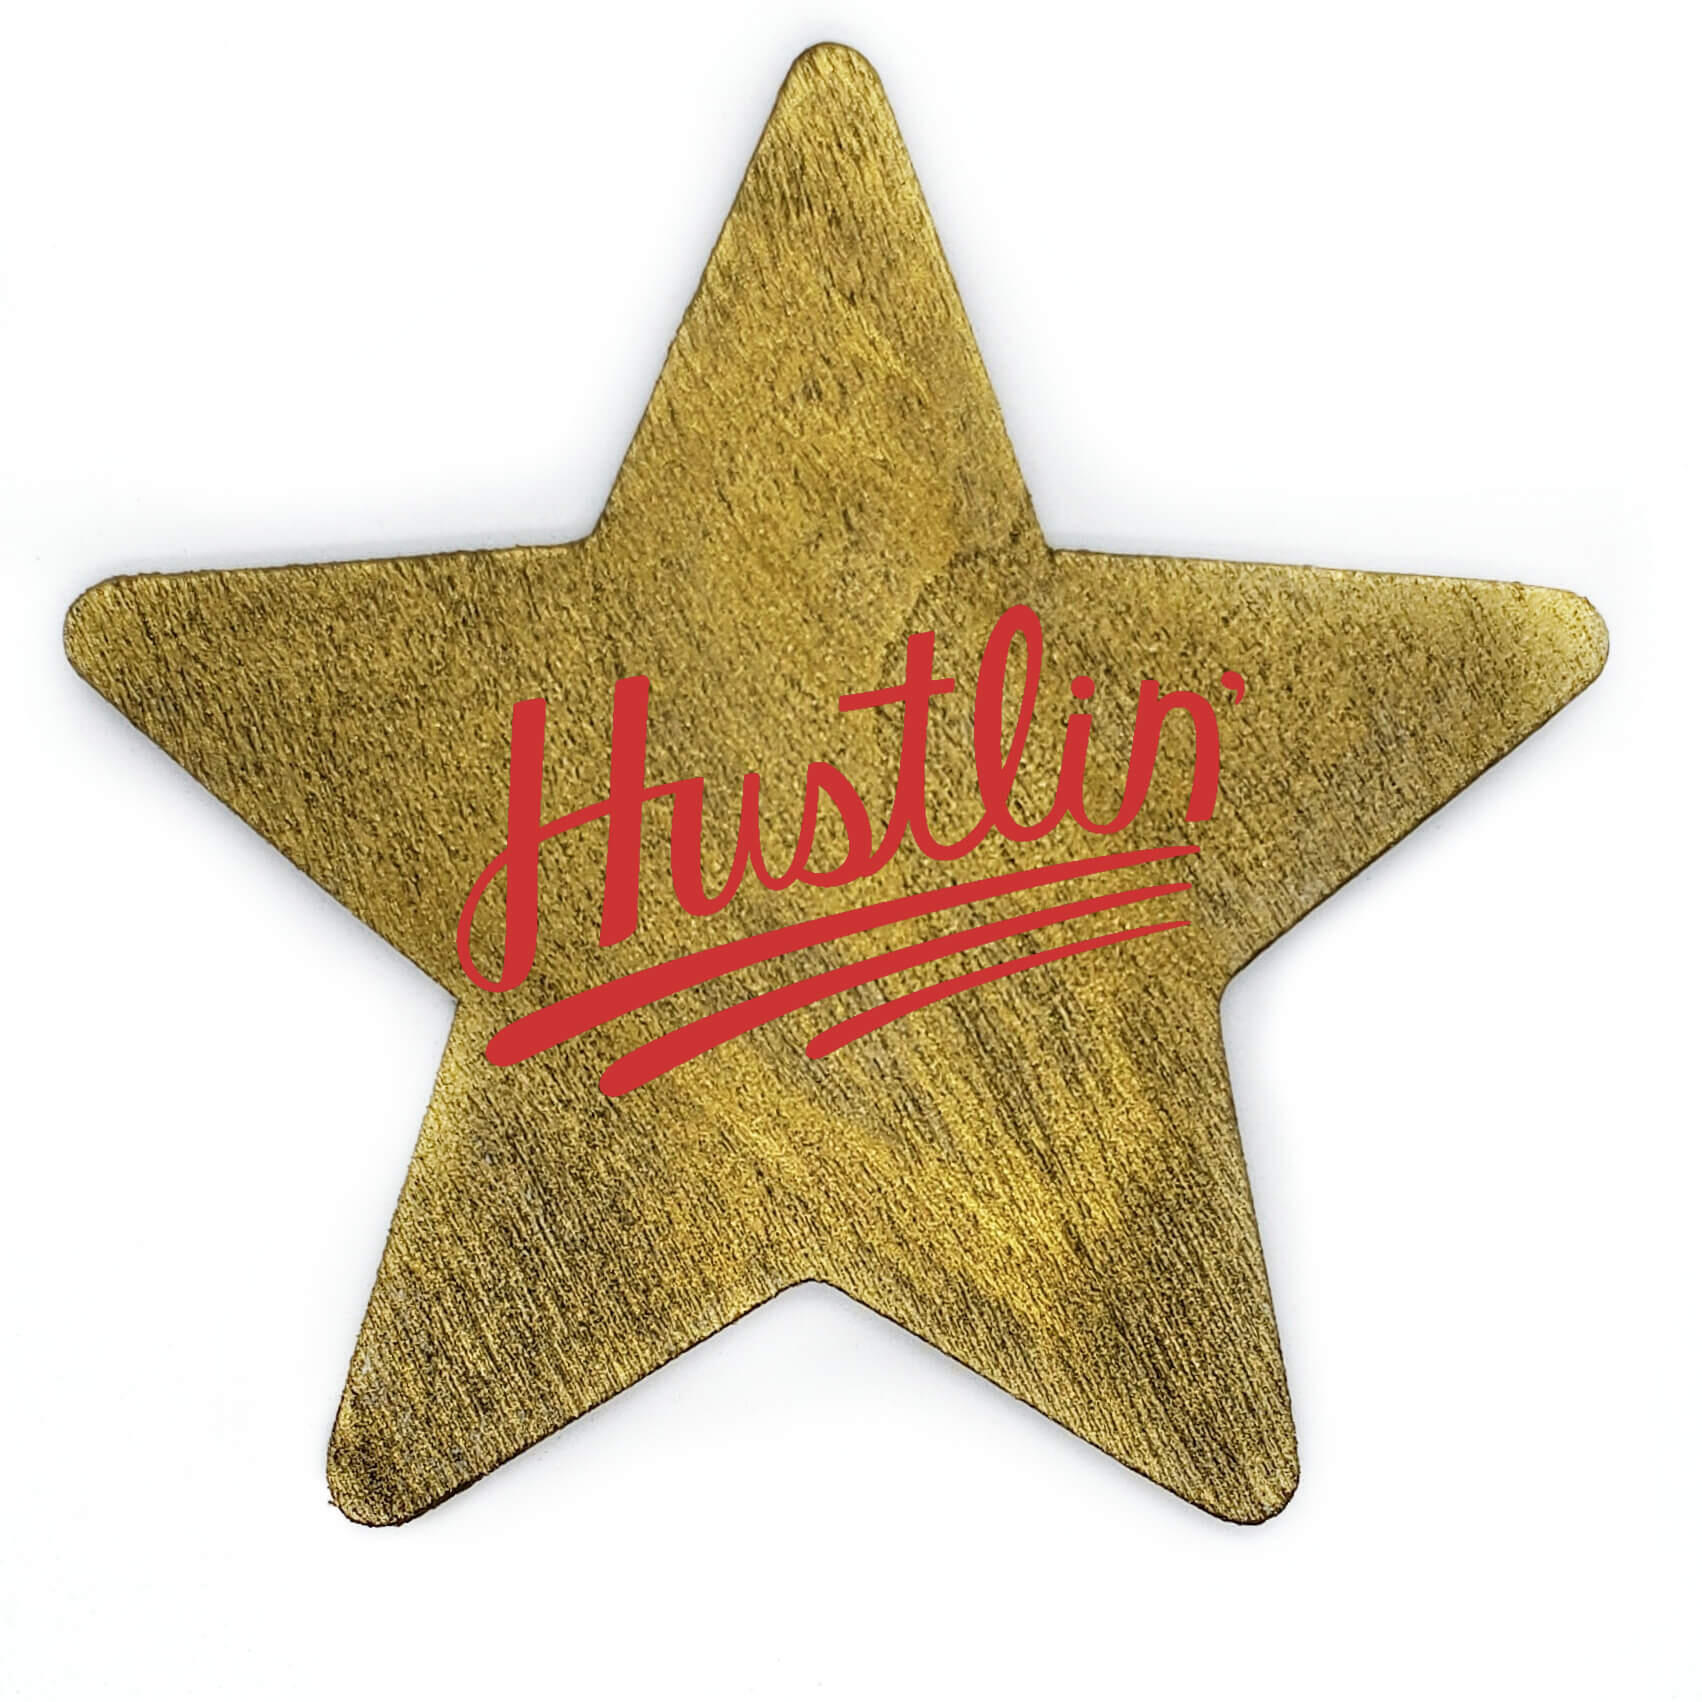 Hand painted wood star fridge magnet, available in multiple colors